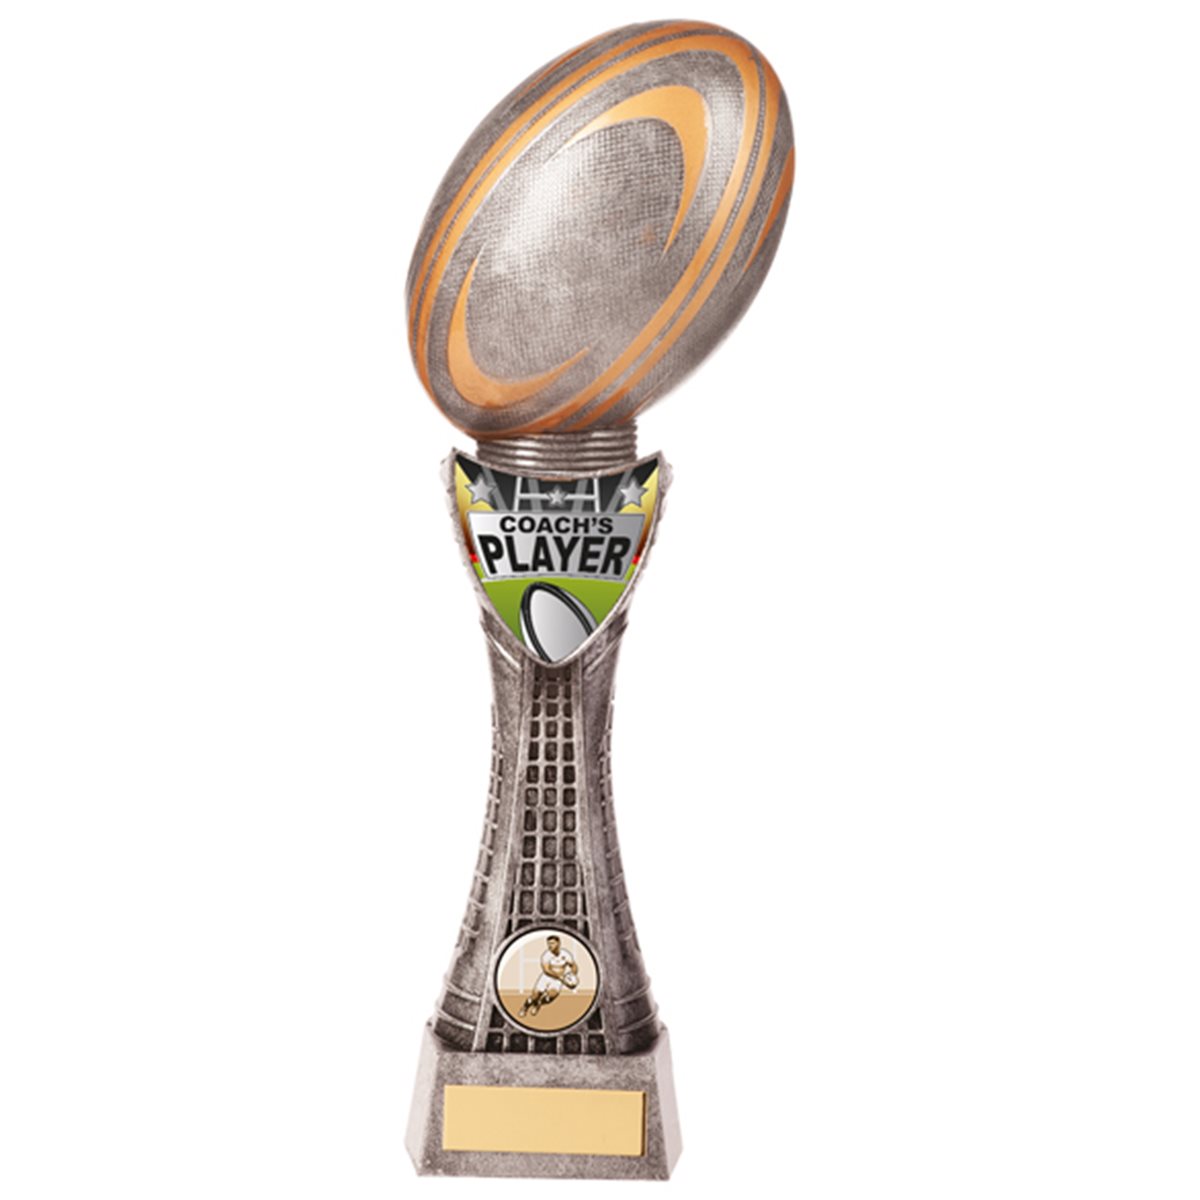 Valiant Coach's Player Rugby Resin Trophy PM20655